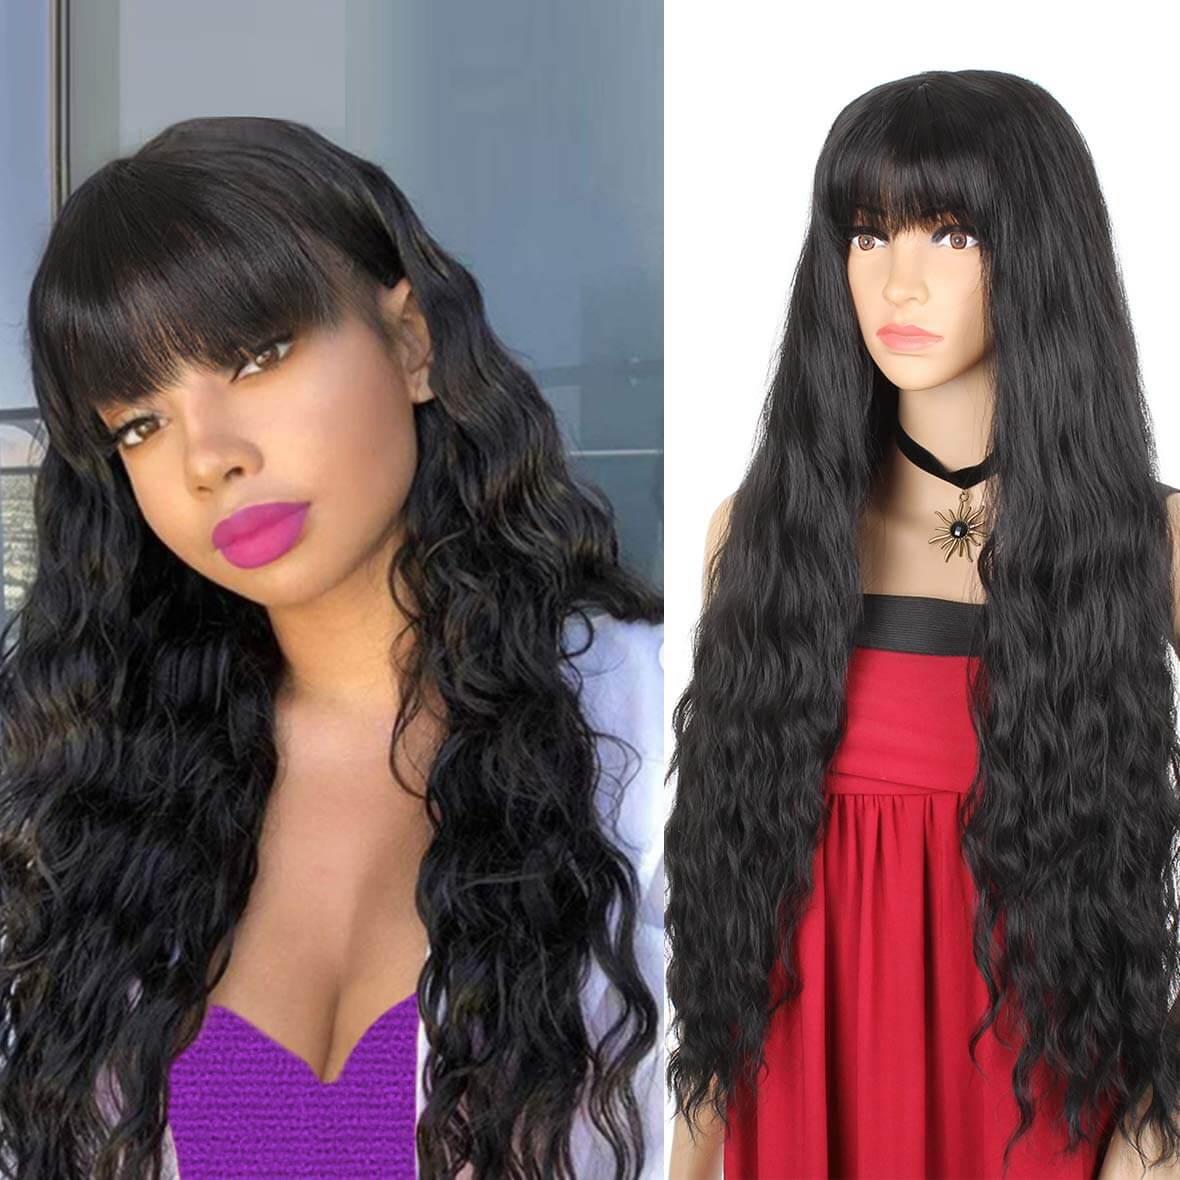 Xtrend 26 Inch Black Wigs With Bangs Synthetic Heat Resistant Curly Wavy Natural Long Loose Wigs Party Cosplay